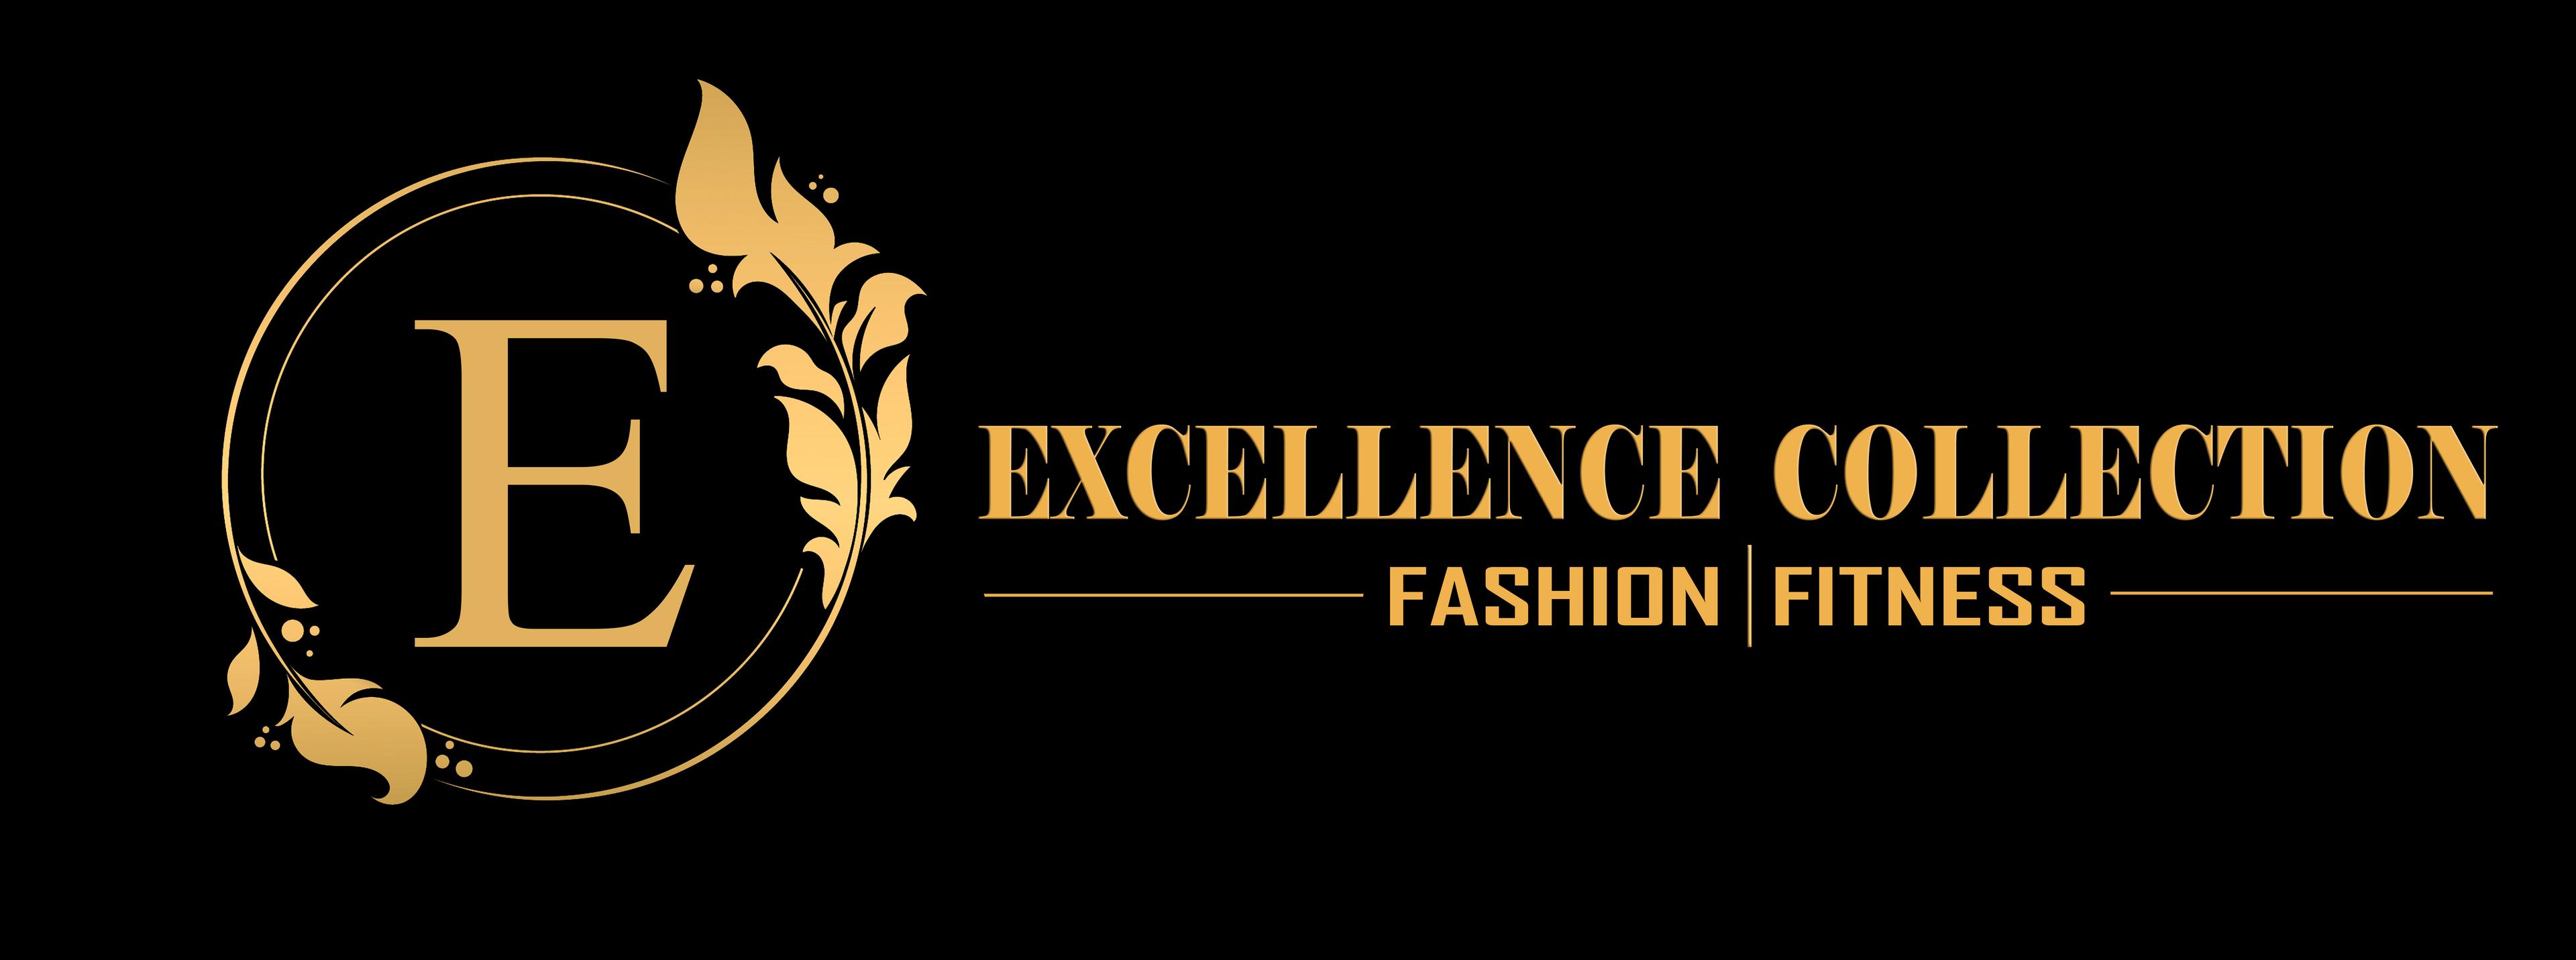 Excellence Collection